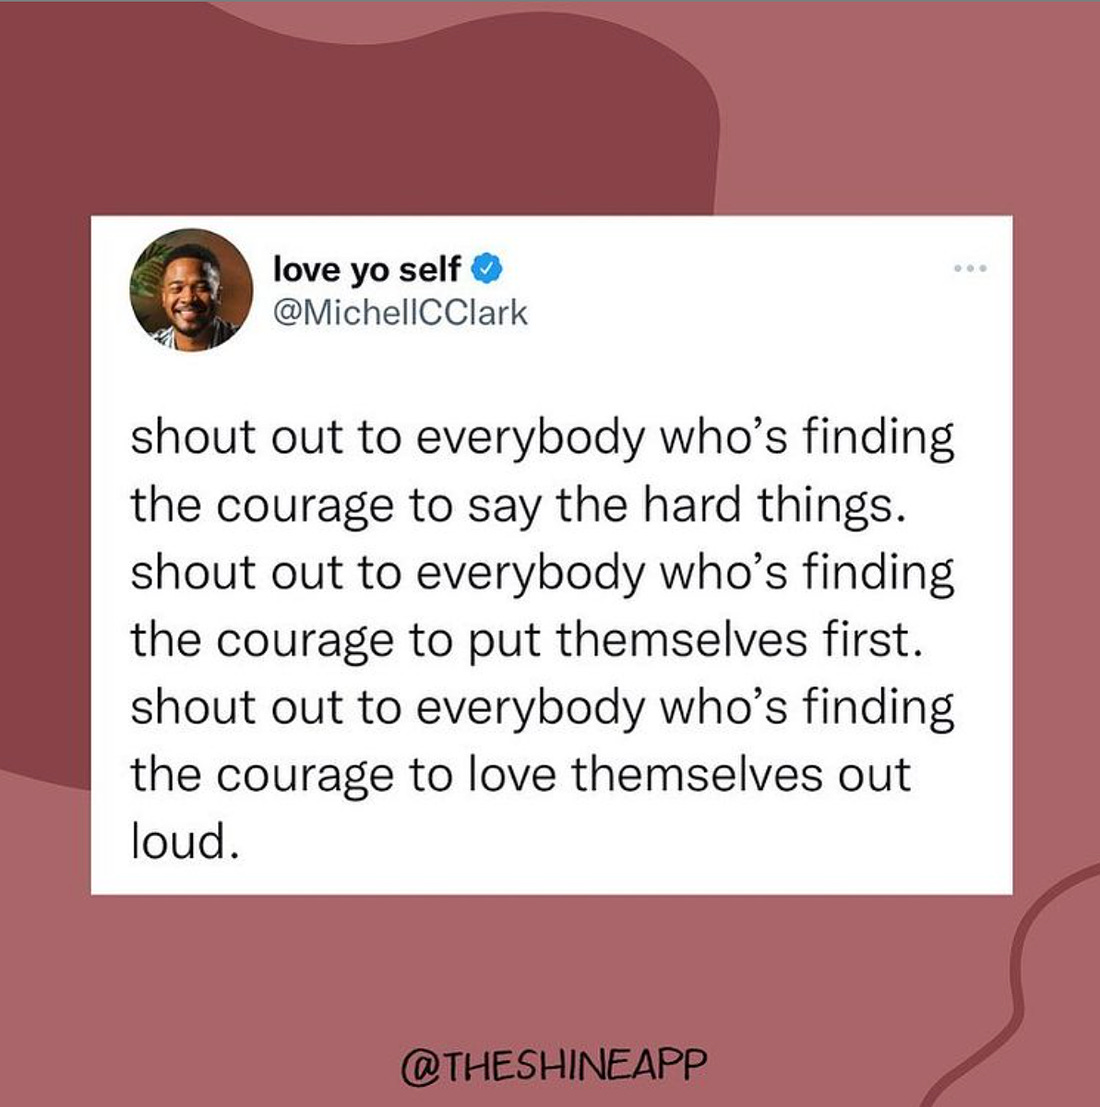 A tweet screenshot in the middle of a red background that reads a tweet from @MichellCClark: "shout out to everybody who's finding the courage to say the hard things. shout out to everybody who's finding the courage to put themselves first. shout out to everybody who's finding the courage to love themselves out loud."